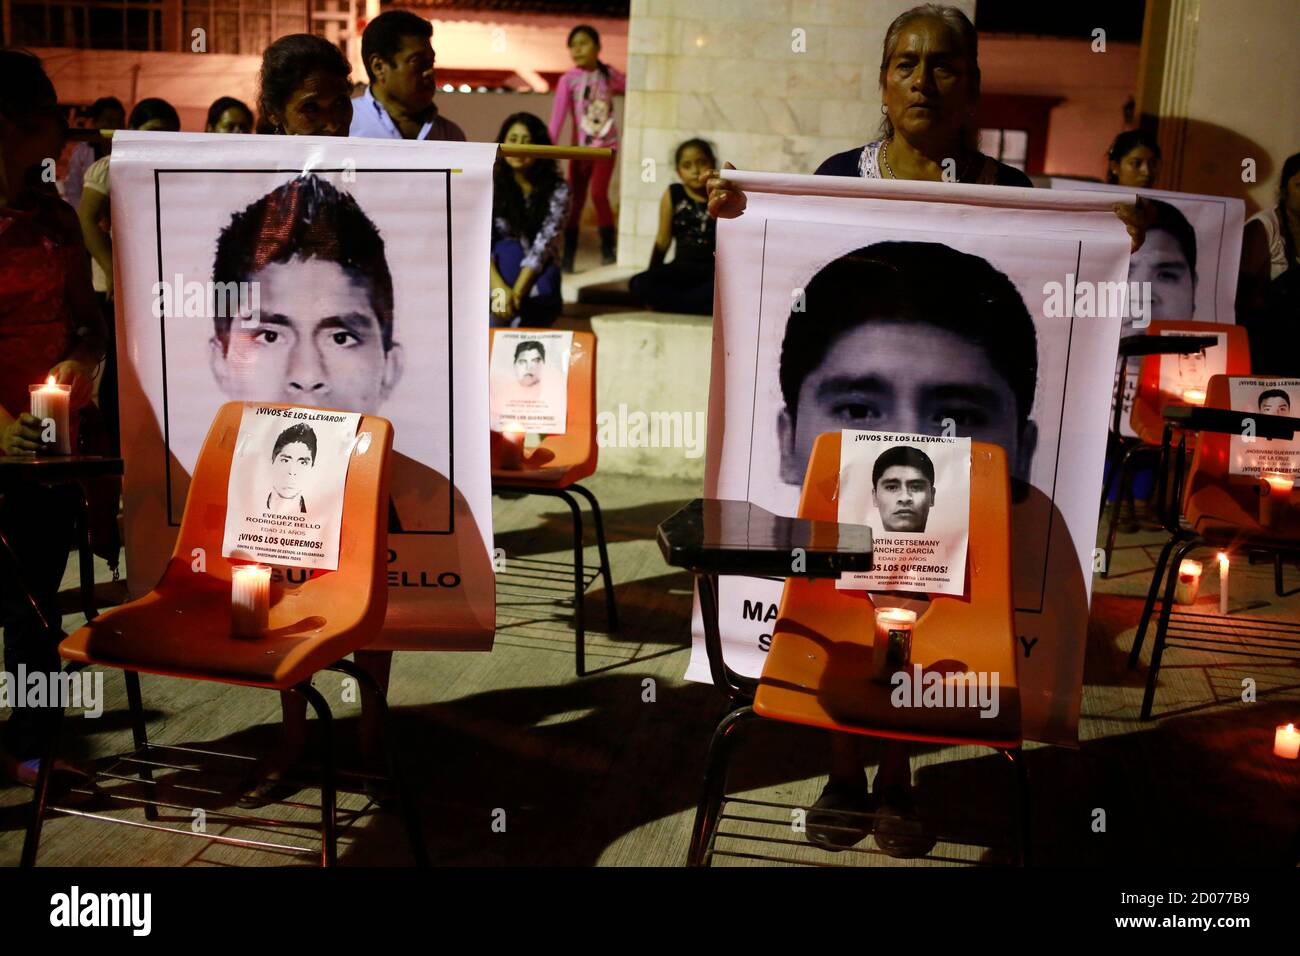 People hold pictures behind chairs displaying images of the 43 missing students of the Ayotzinapa Teacher Training College Raul Isidro Burgos, during a demonstration in Tixtla, Guerrero, November 15, 2014. Criticism of the government has intensified in Mexico since Attorney General Jesus Murillo said last week that evidence suggests 43 missing trainee teachers were murdered by gunmen and drug gangs in collaboration with corrupt police and local politicians. The students were reportedly incinerated in a bonfire at a garbage dump and their ashes thrown in a river. Authorities said some of the st Stock Photo